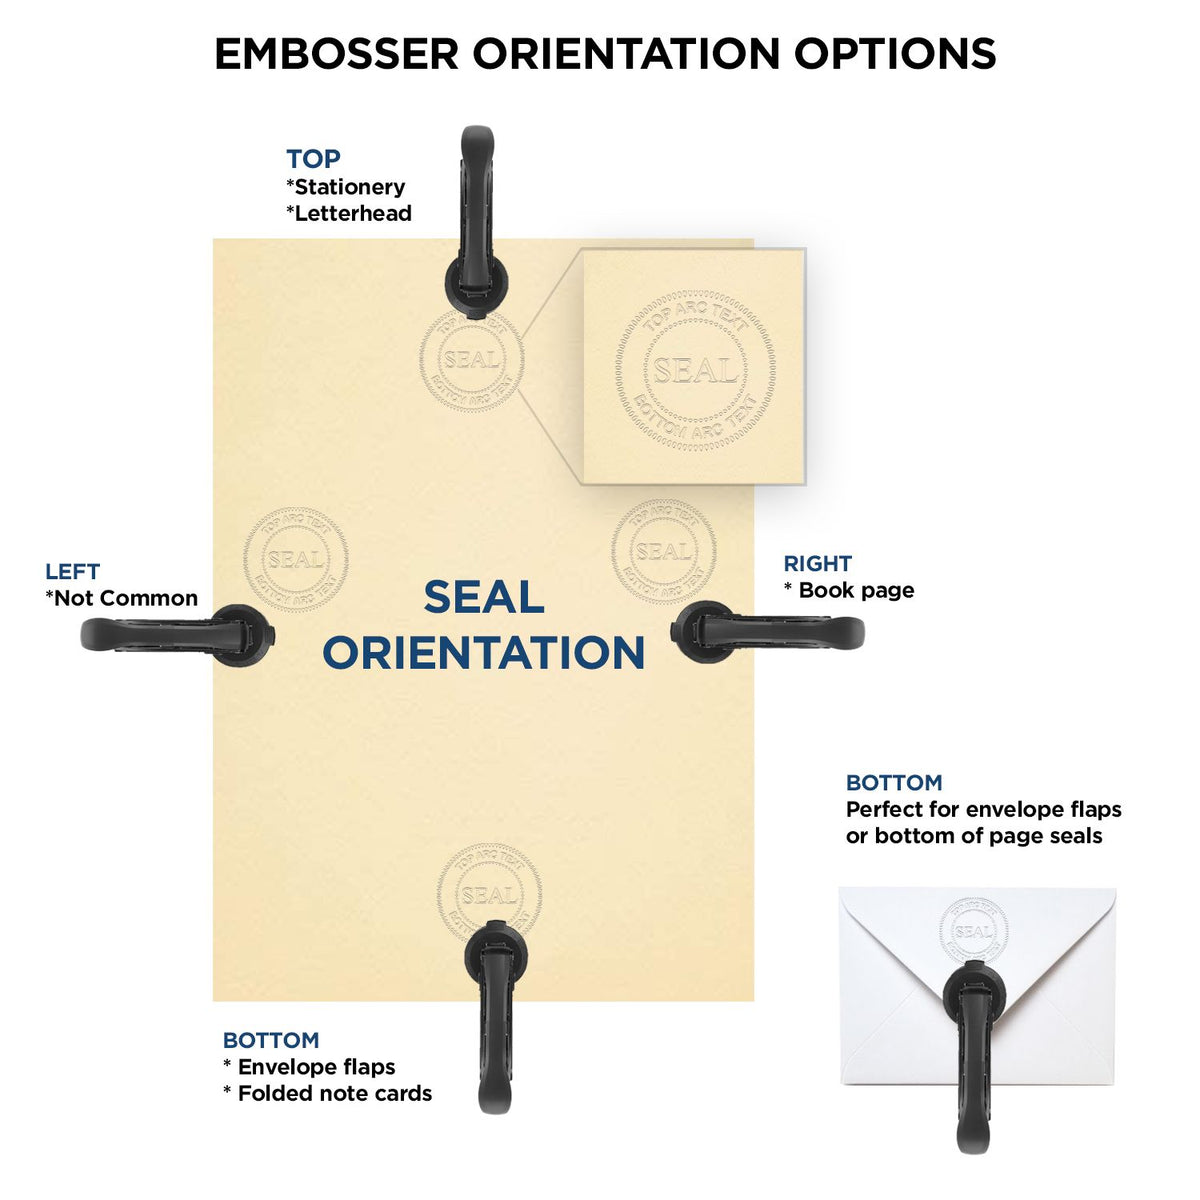 An infographic for the Texas Desk Architect Embossing Seal showing embosser orientation, this is showing examples of a top, bottom, right and left insert.